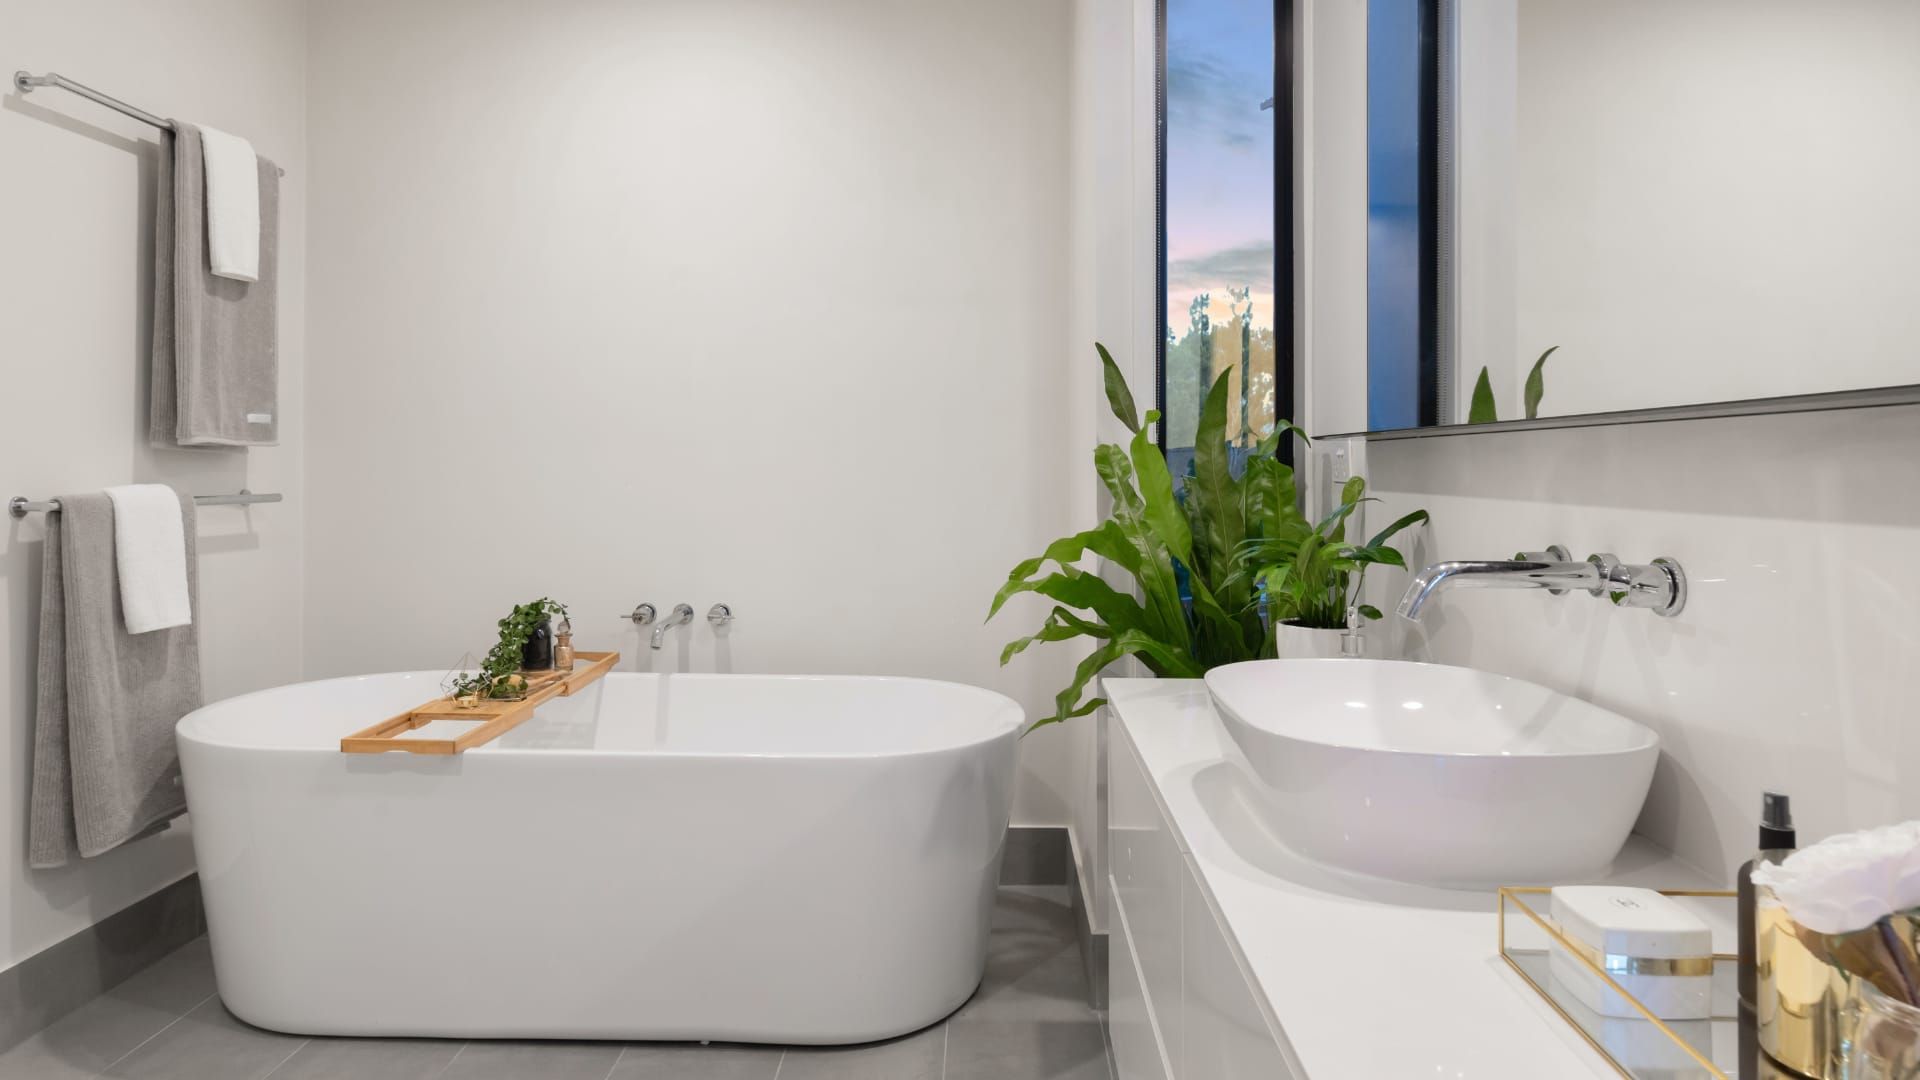 Boost your home’s value via the bathroom